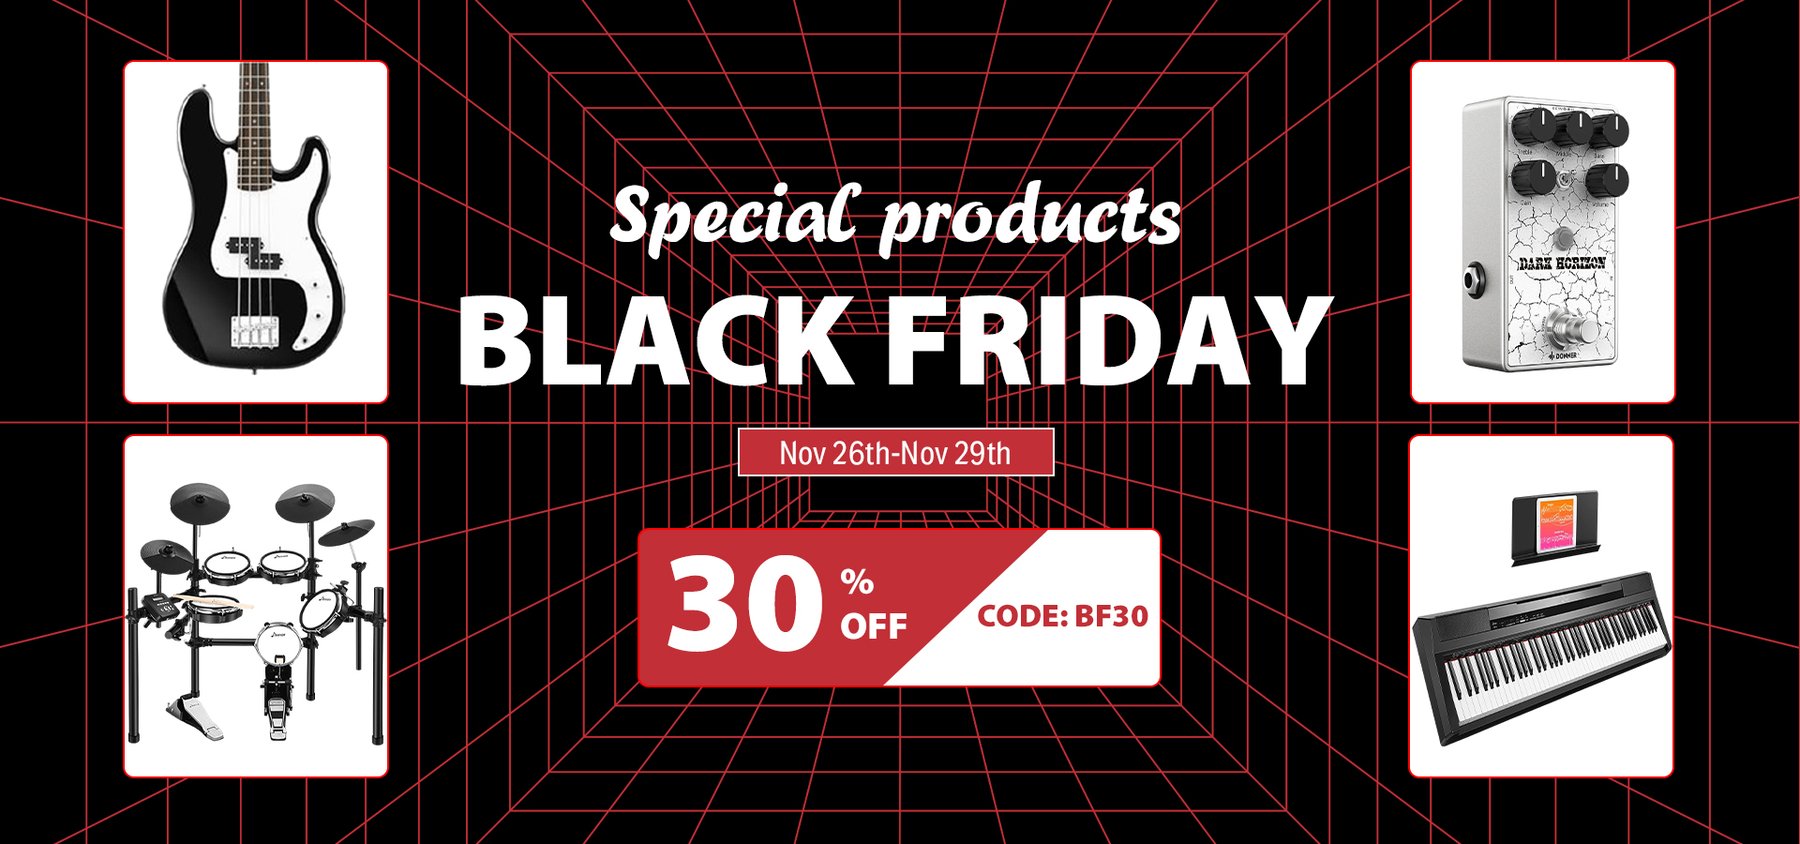 Donner Music Black Friday extra 30% OFF with discount code including guitars, flutes & more